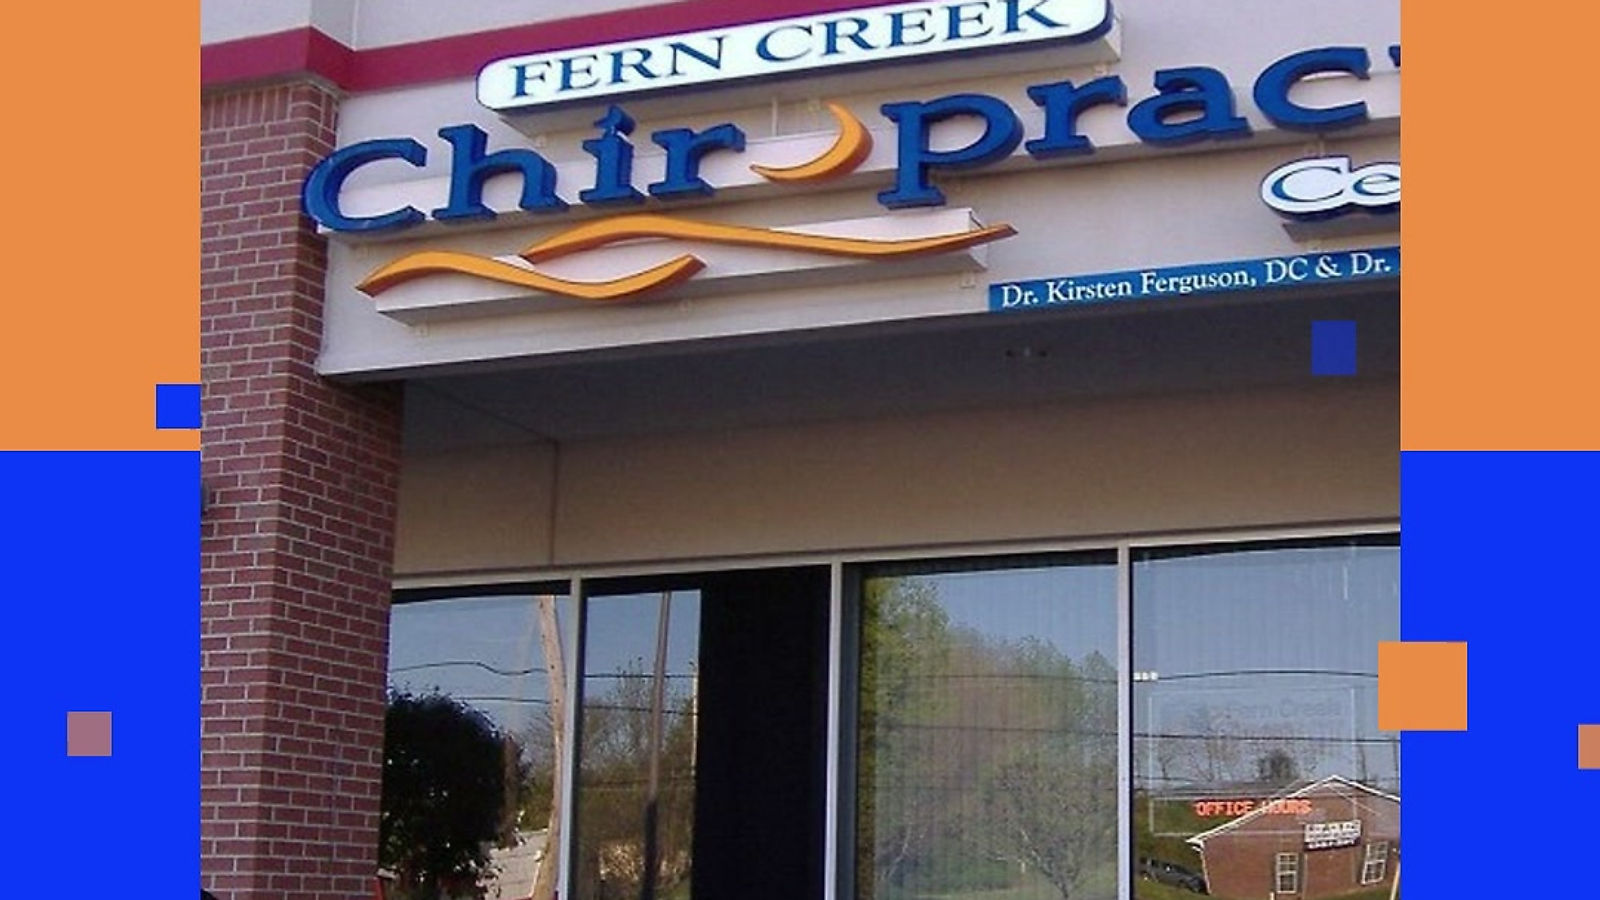 It’s a great day at Fern Creek Chiropractic Center! (1)